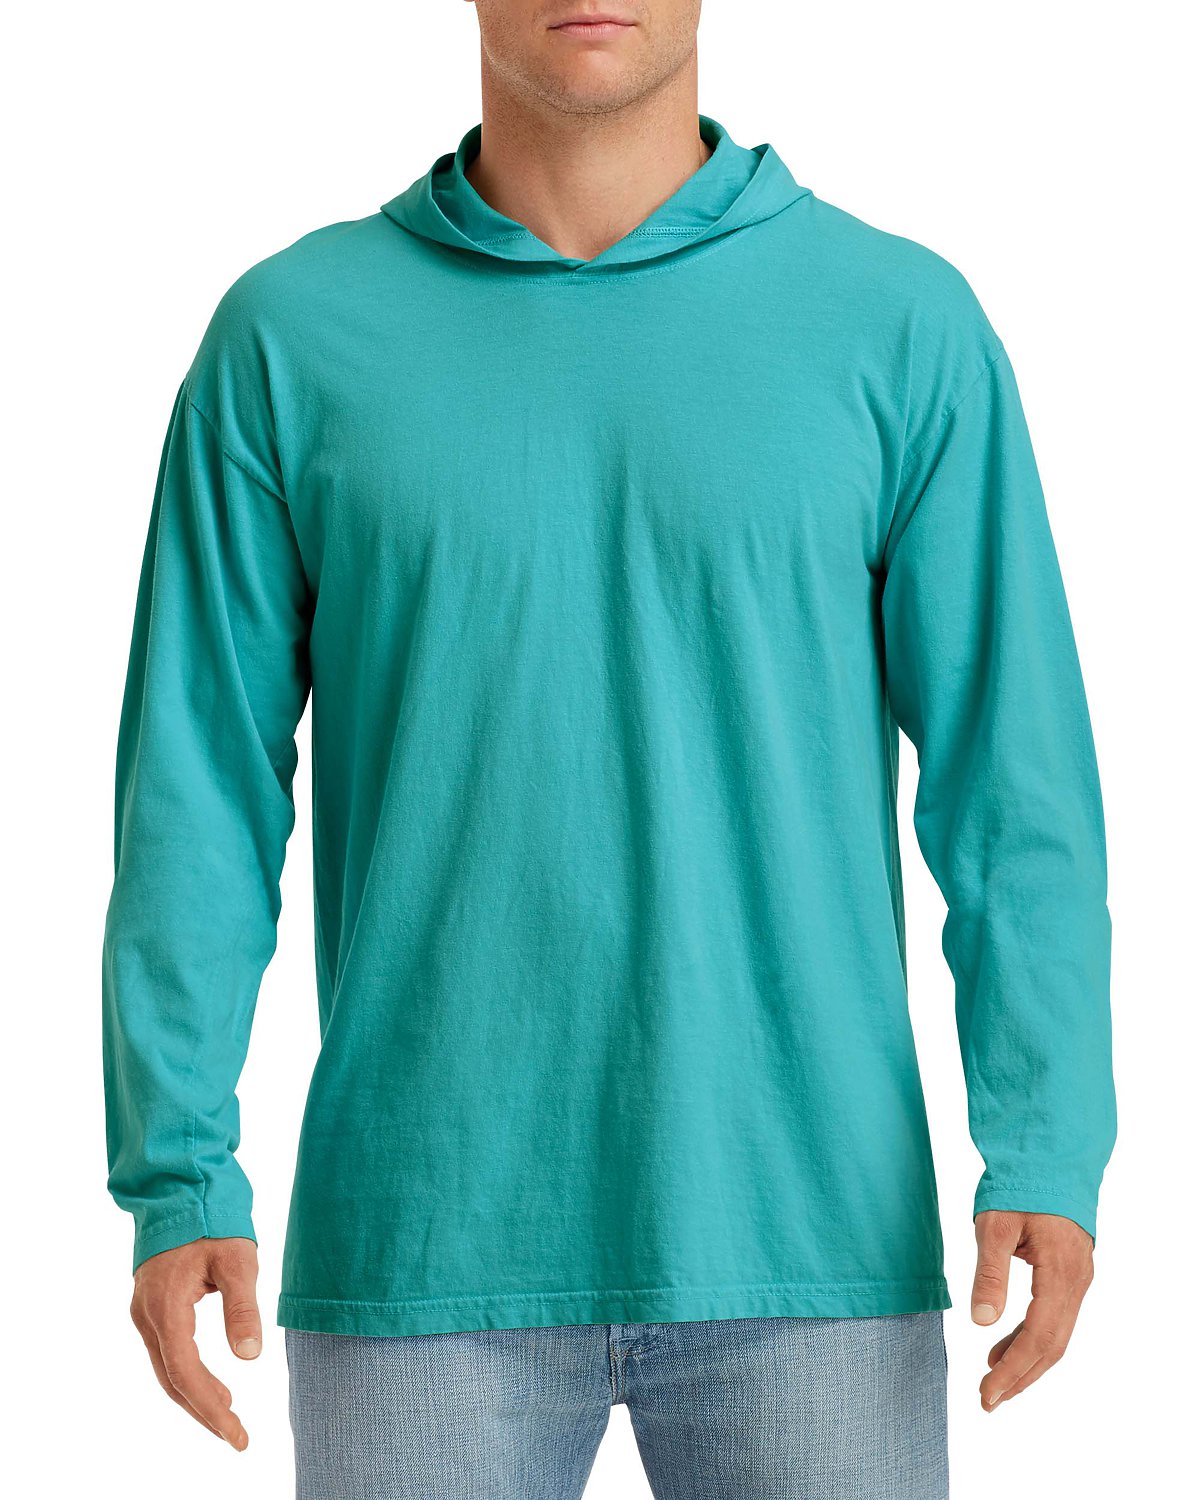 Comfort Colours 4900 CC Long Sleeve Hooded Tee - S-XL